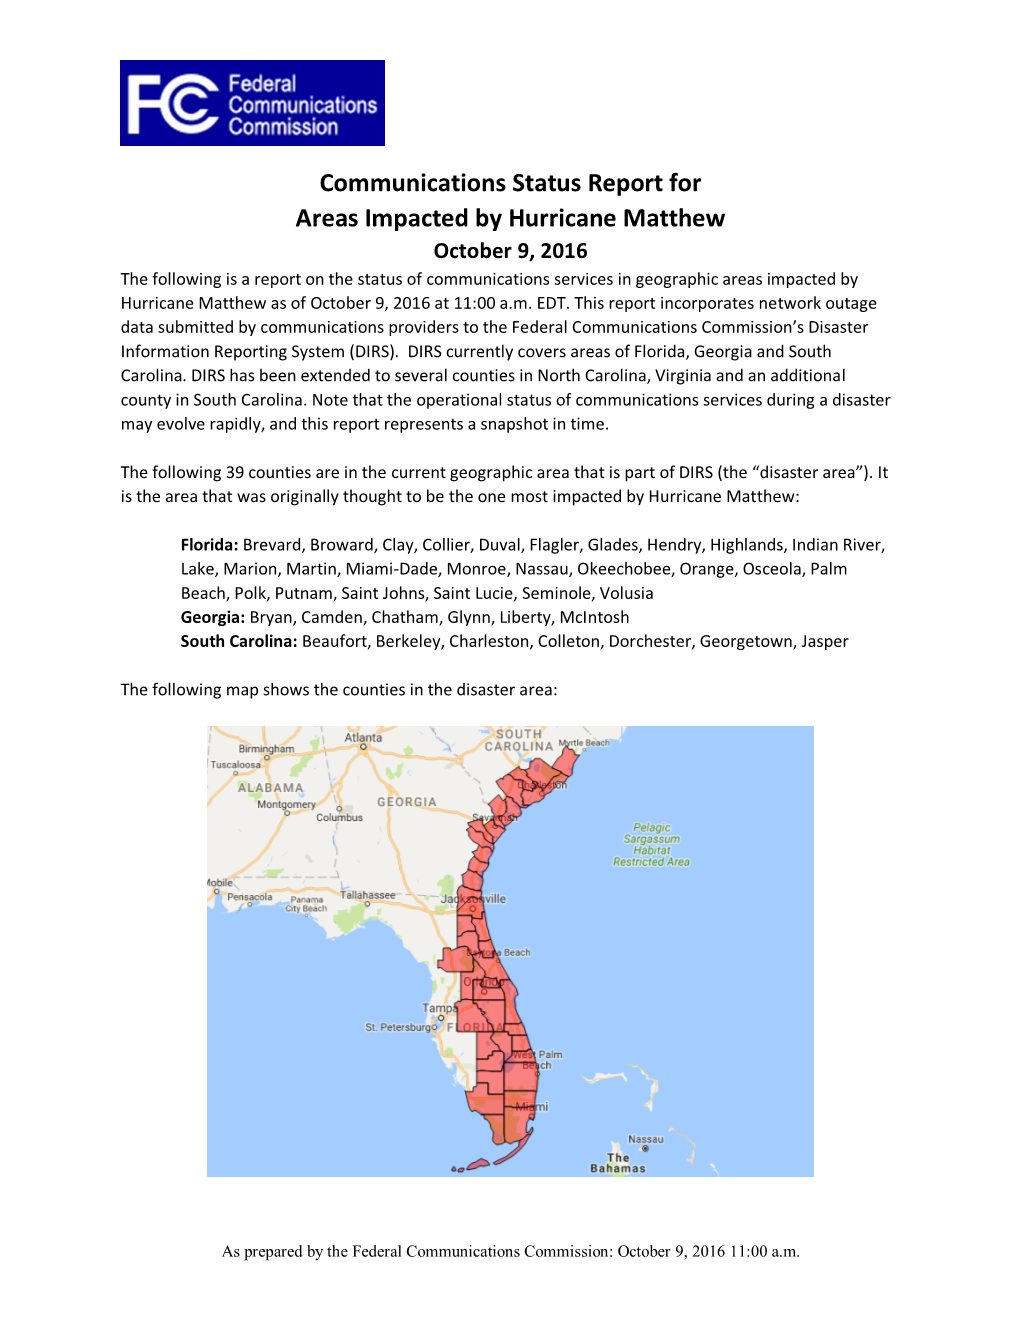 Communications Status Report for Areas Impacted by Hurricane